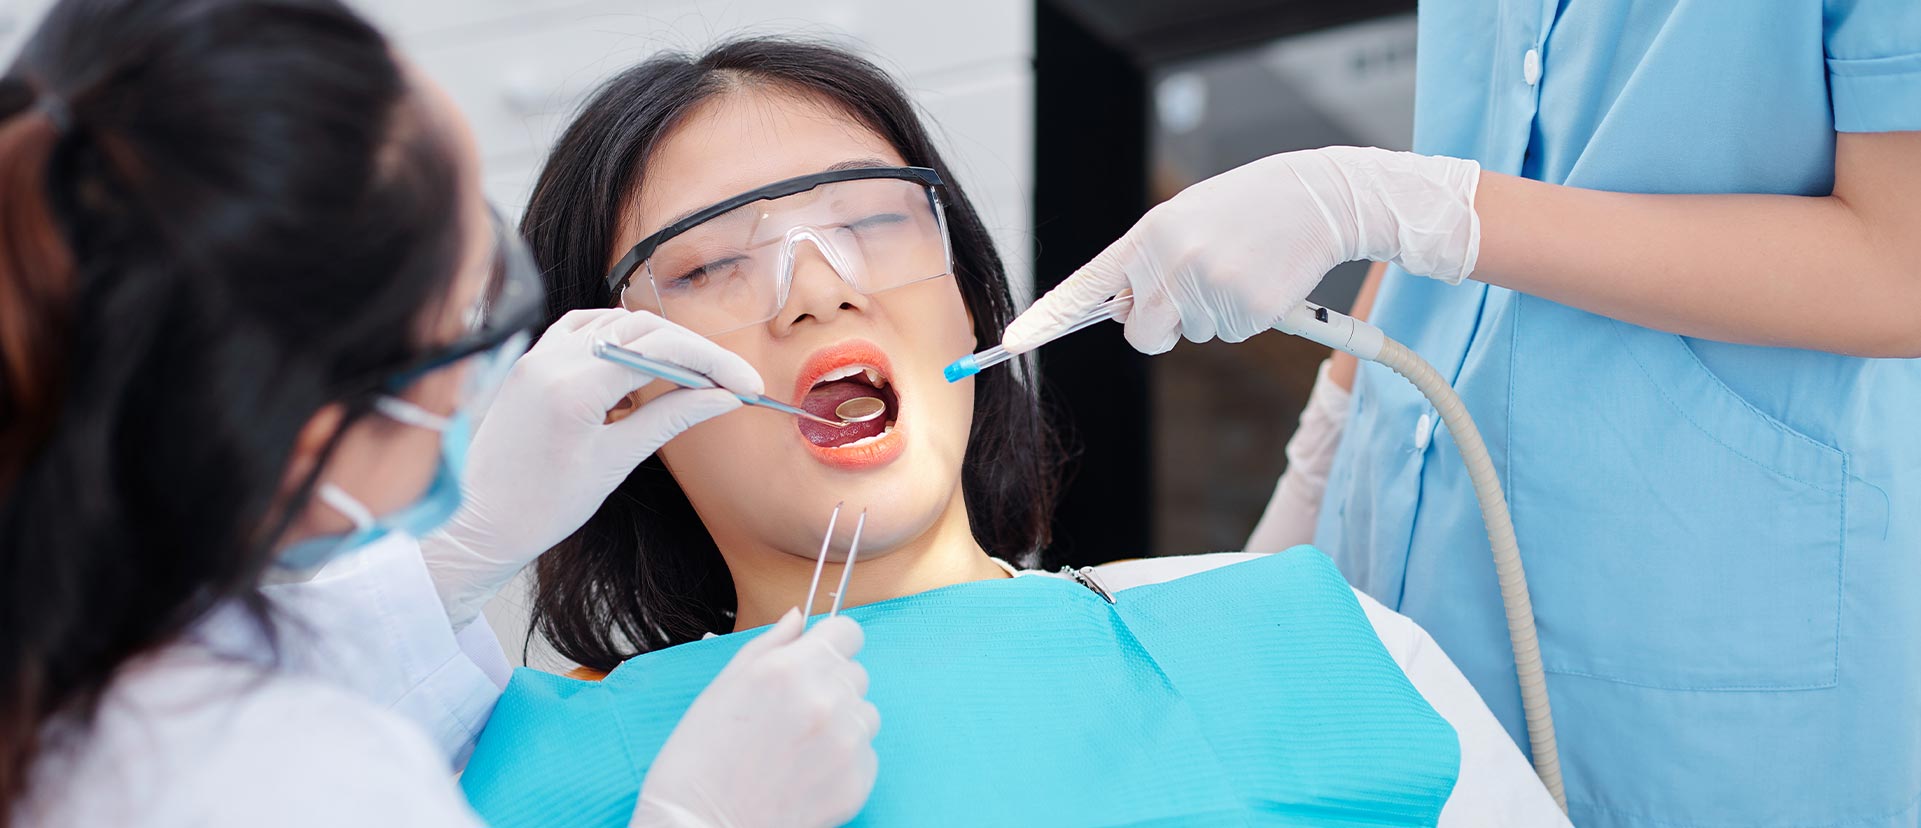 A woman is having tooth extraction at the dental